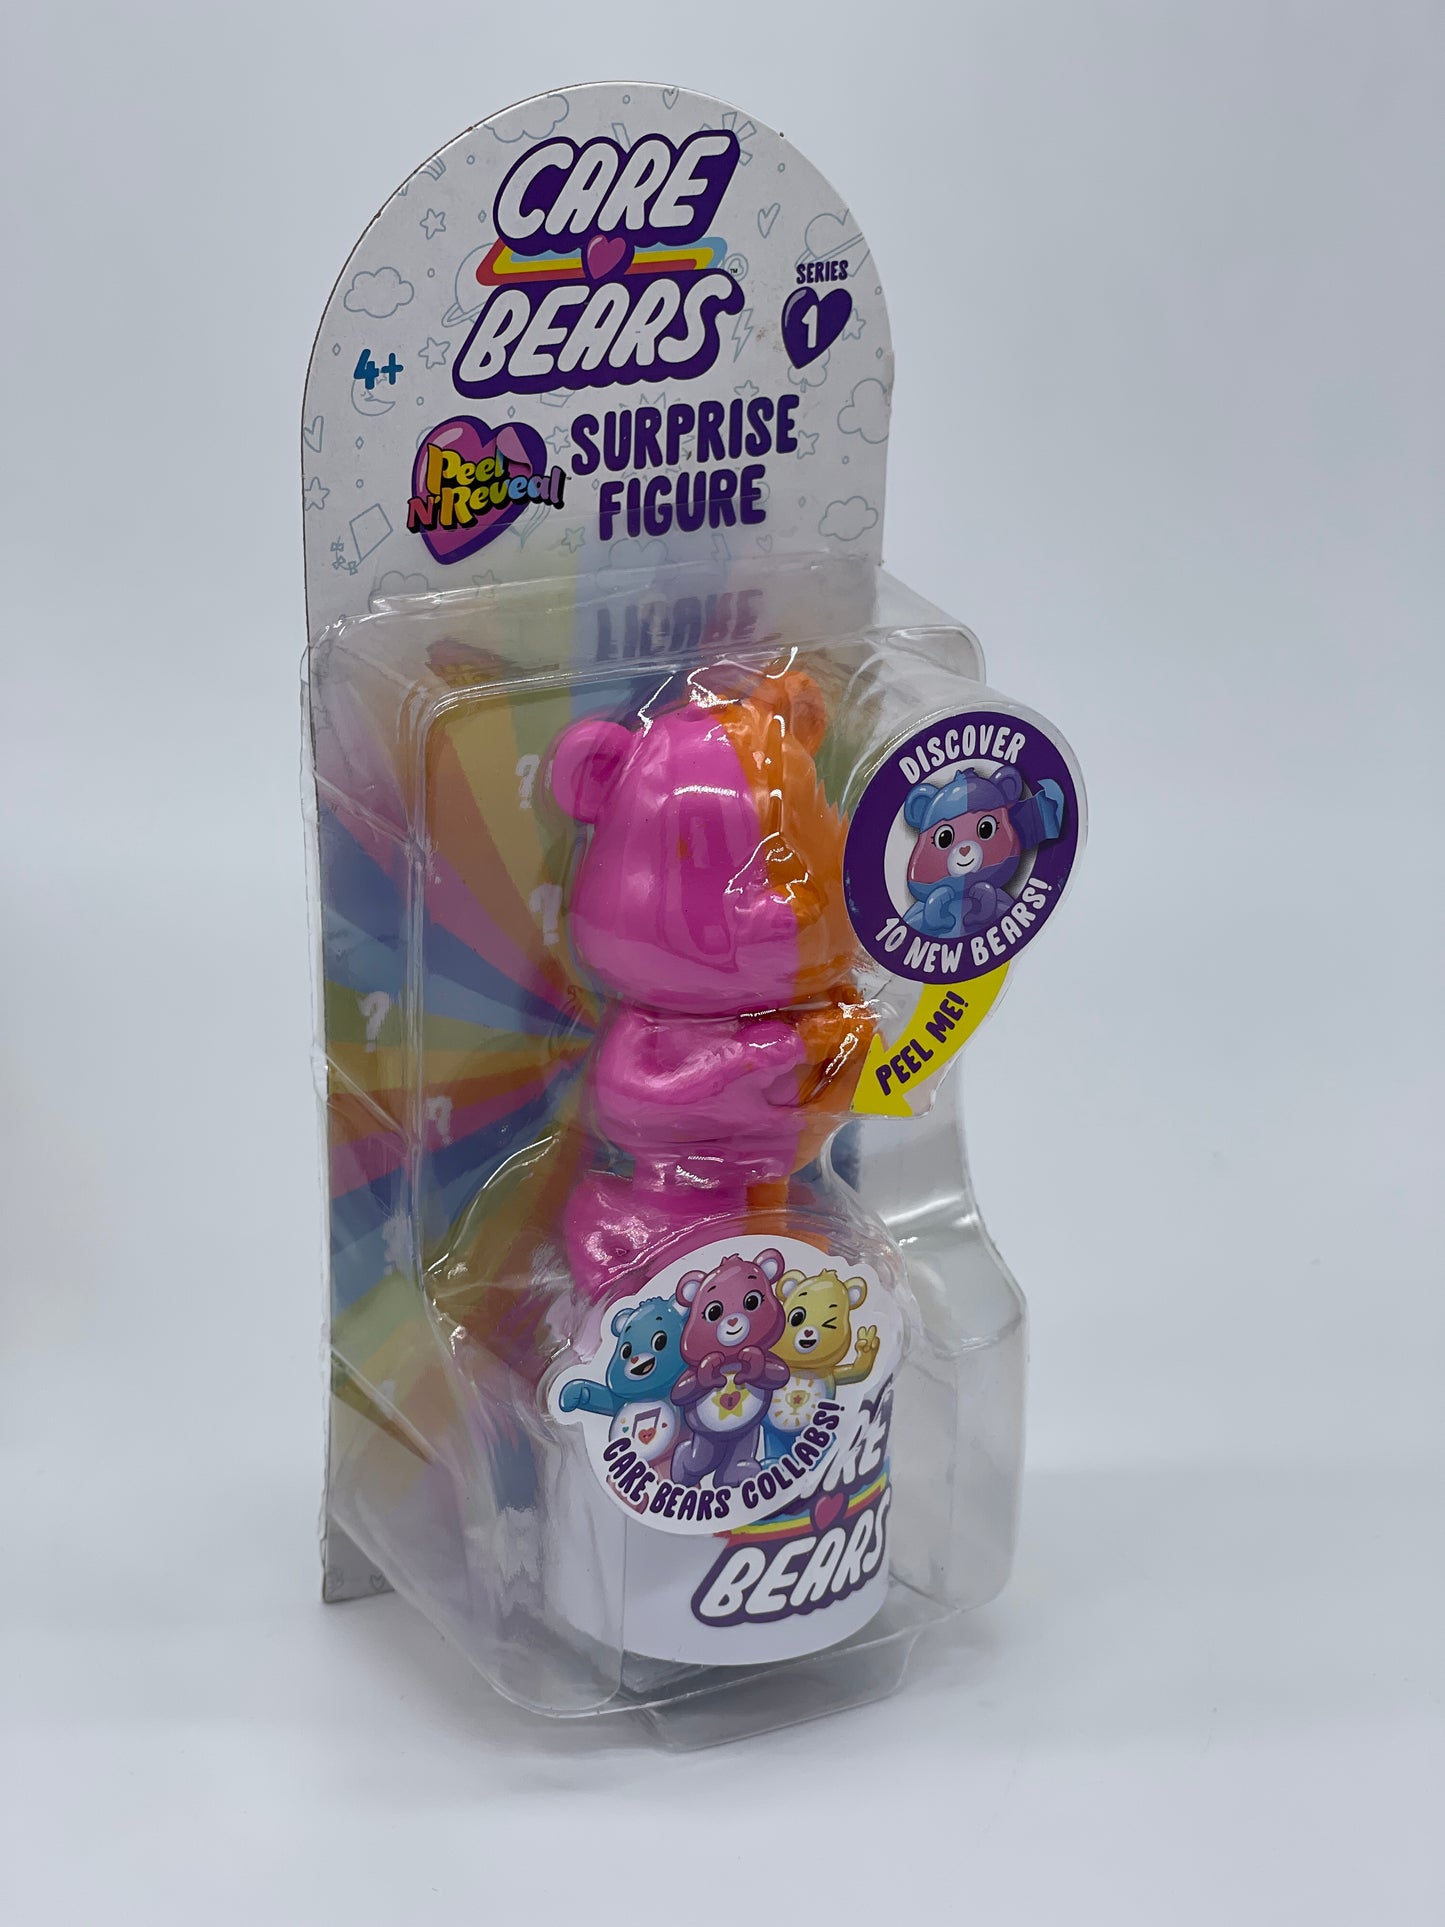 Care Bears Care Bears "Surprise Figures Peel and Reveal" 10 New Bears (2022)